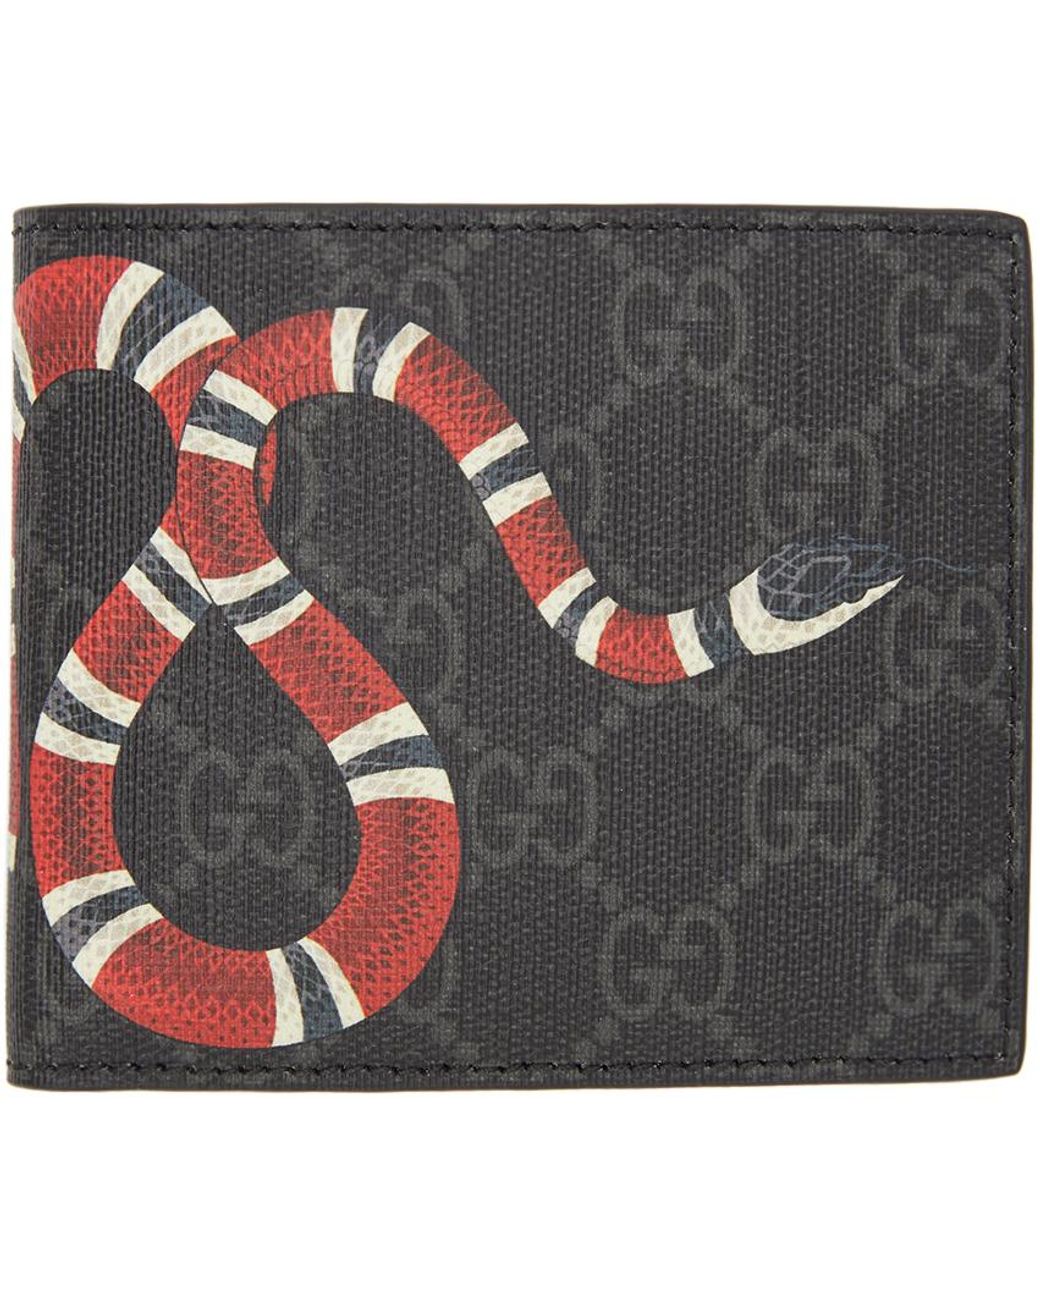 Gucci gg Supreme Snake Wallet in Gray for Men | Lyst